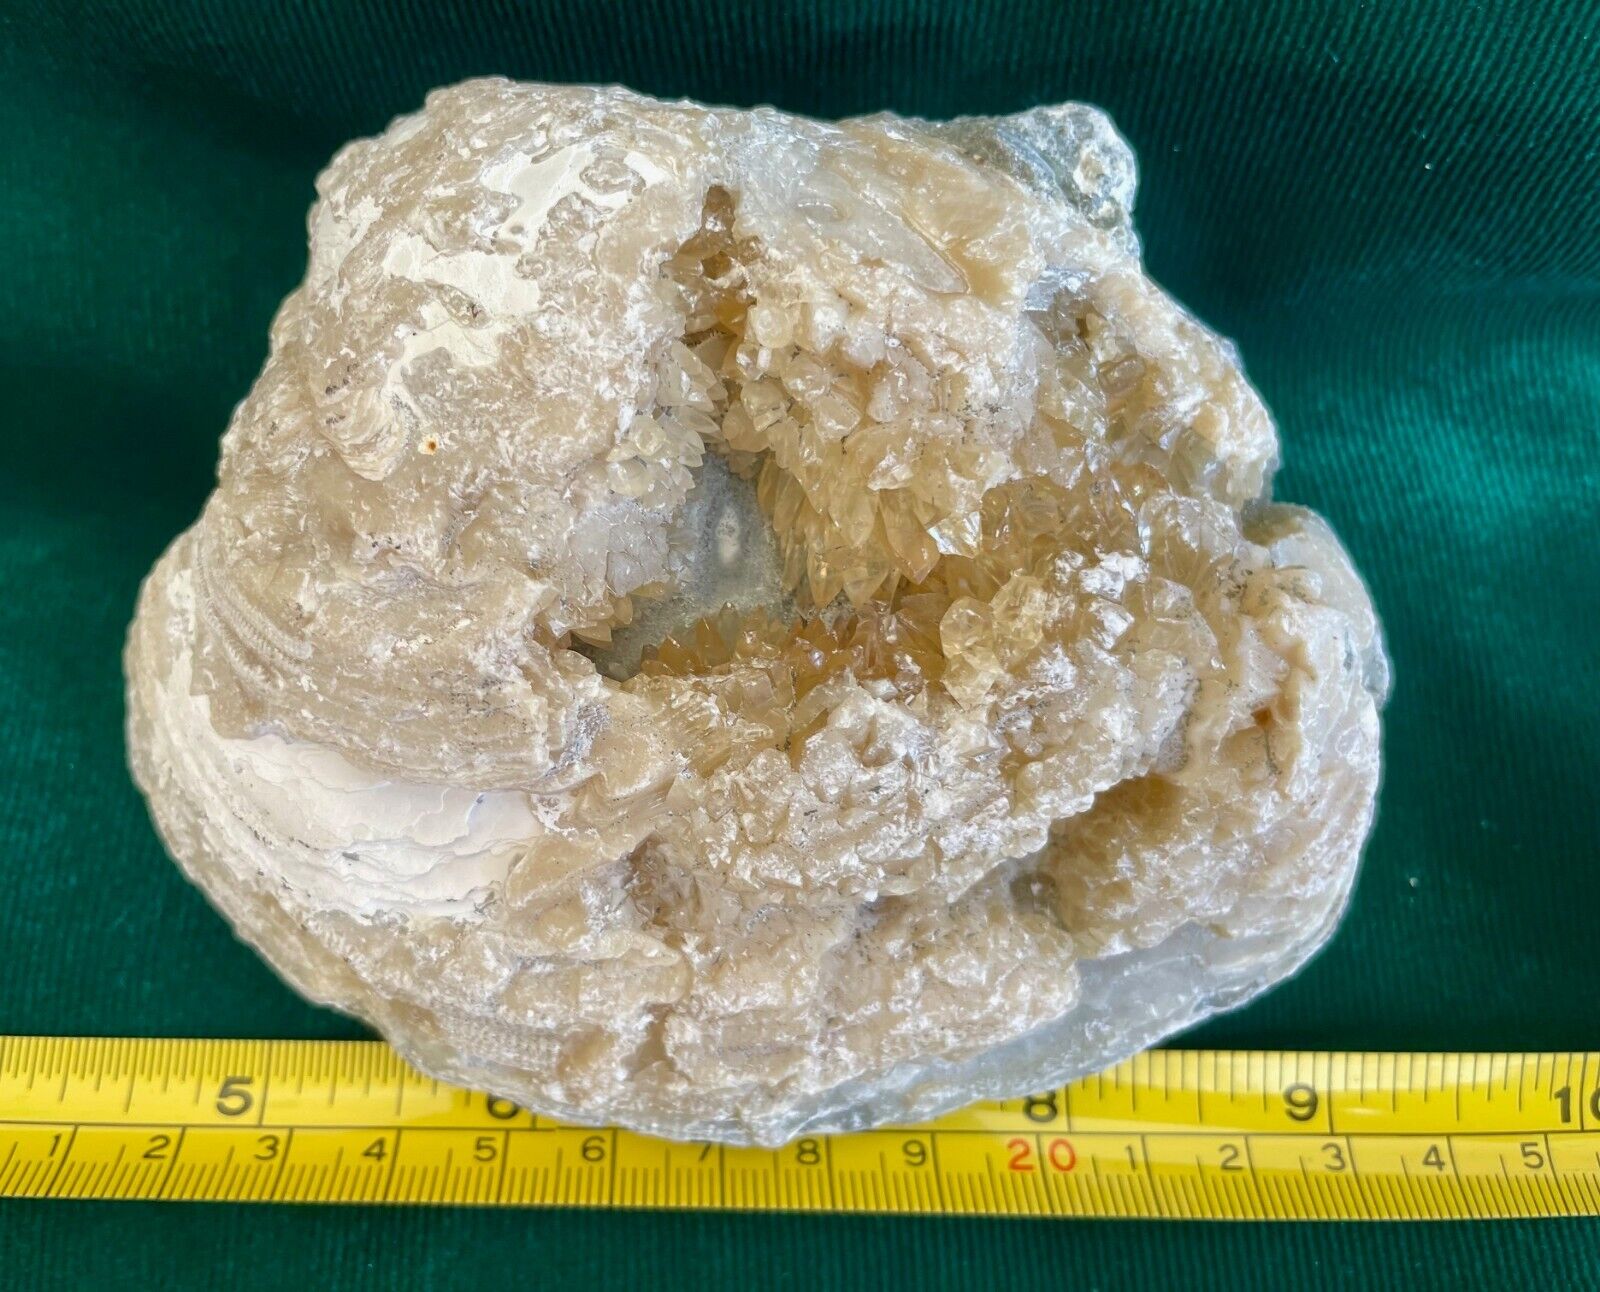 Fossil Calcite Clams with bright Dog Teeth pointed calcite